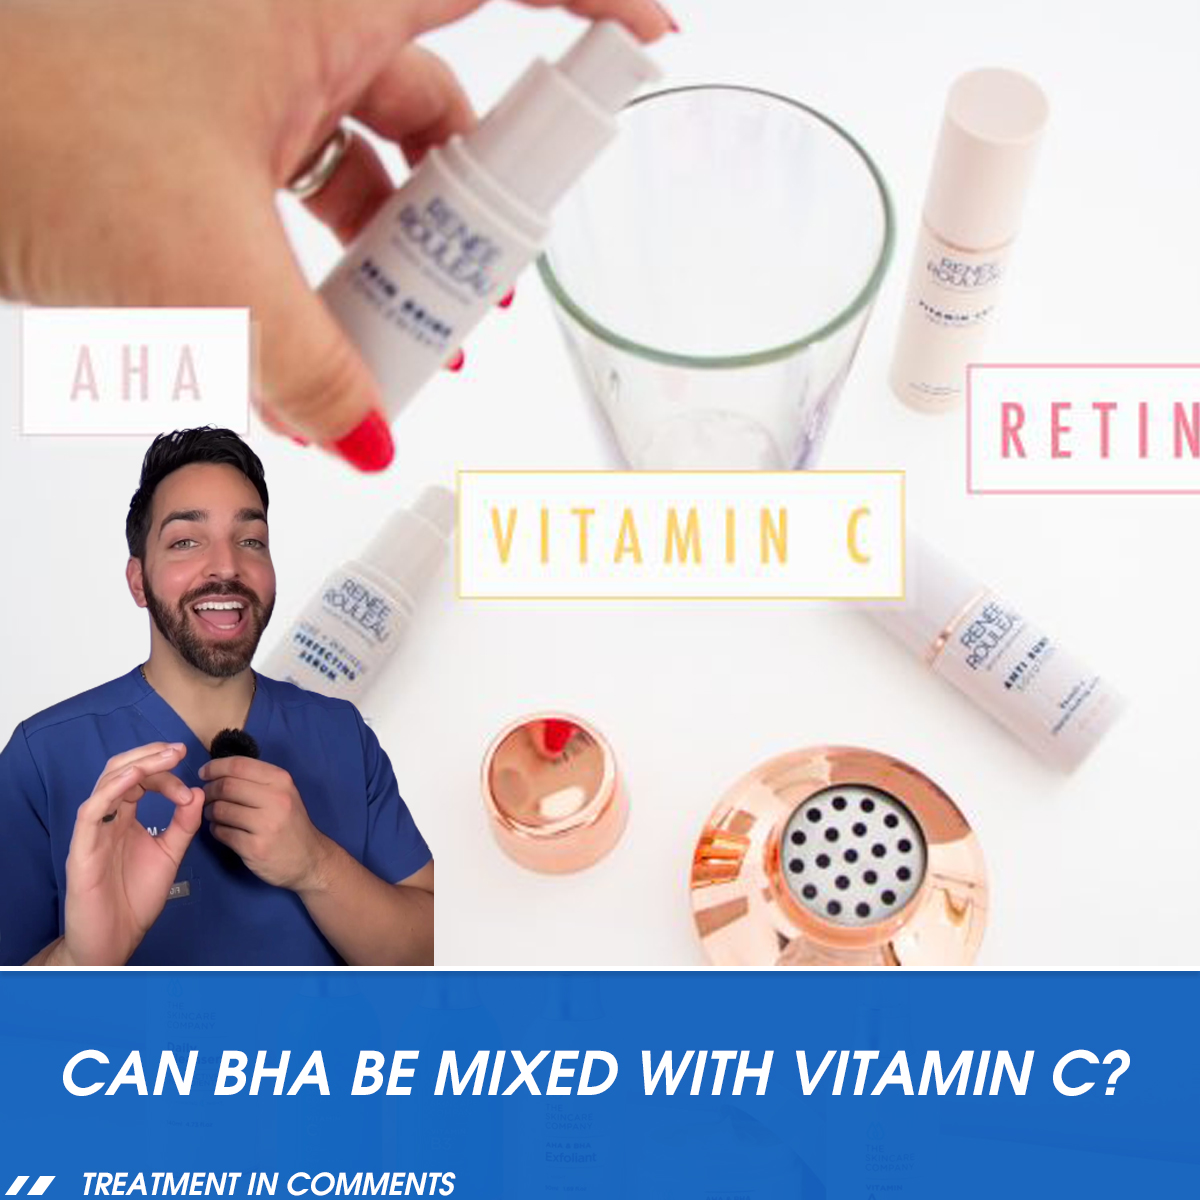 Can BHA be mixed with Vitamin C?